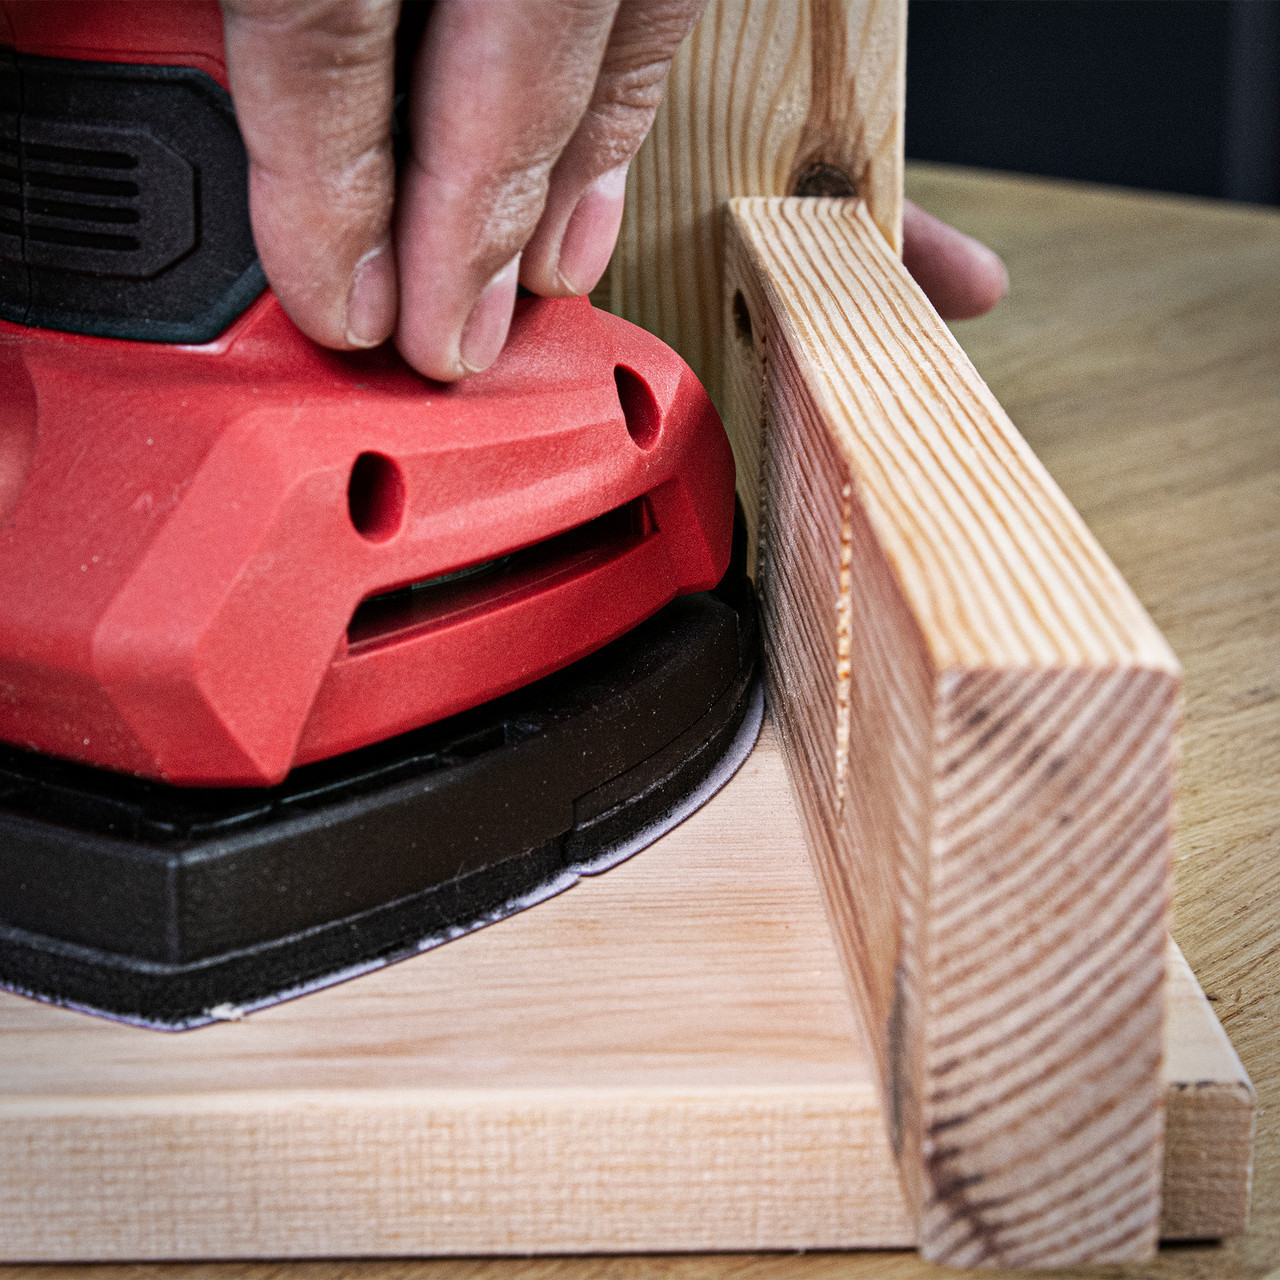 Detail Sander Applications Include Flat areas, sanding into corners, keying, preparation, cleaning and fine finishing